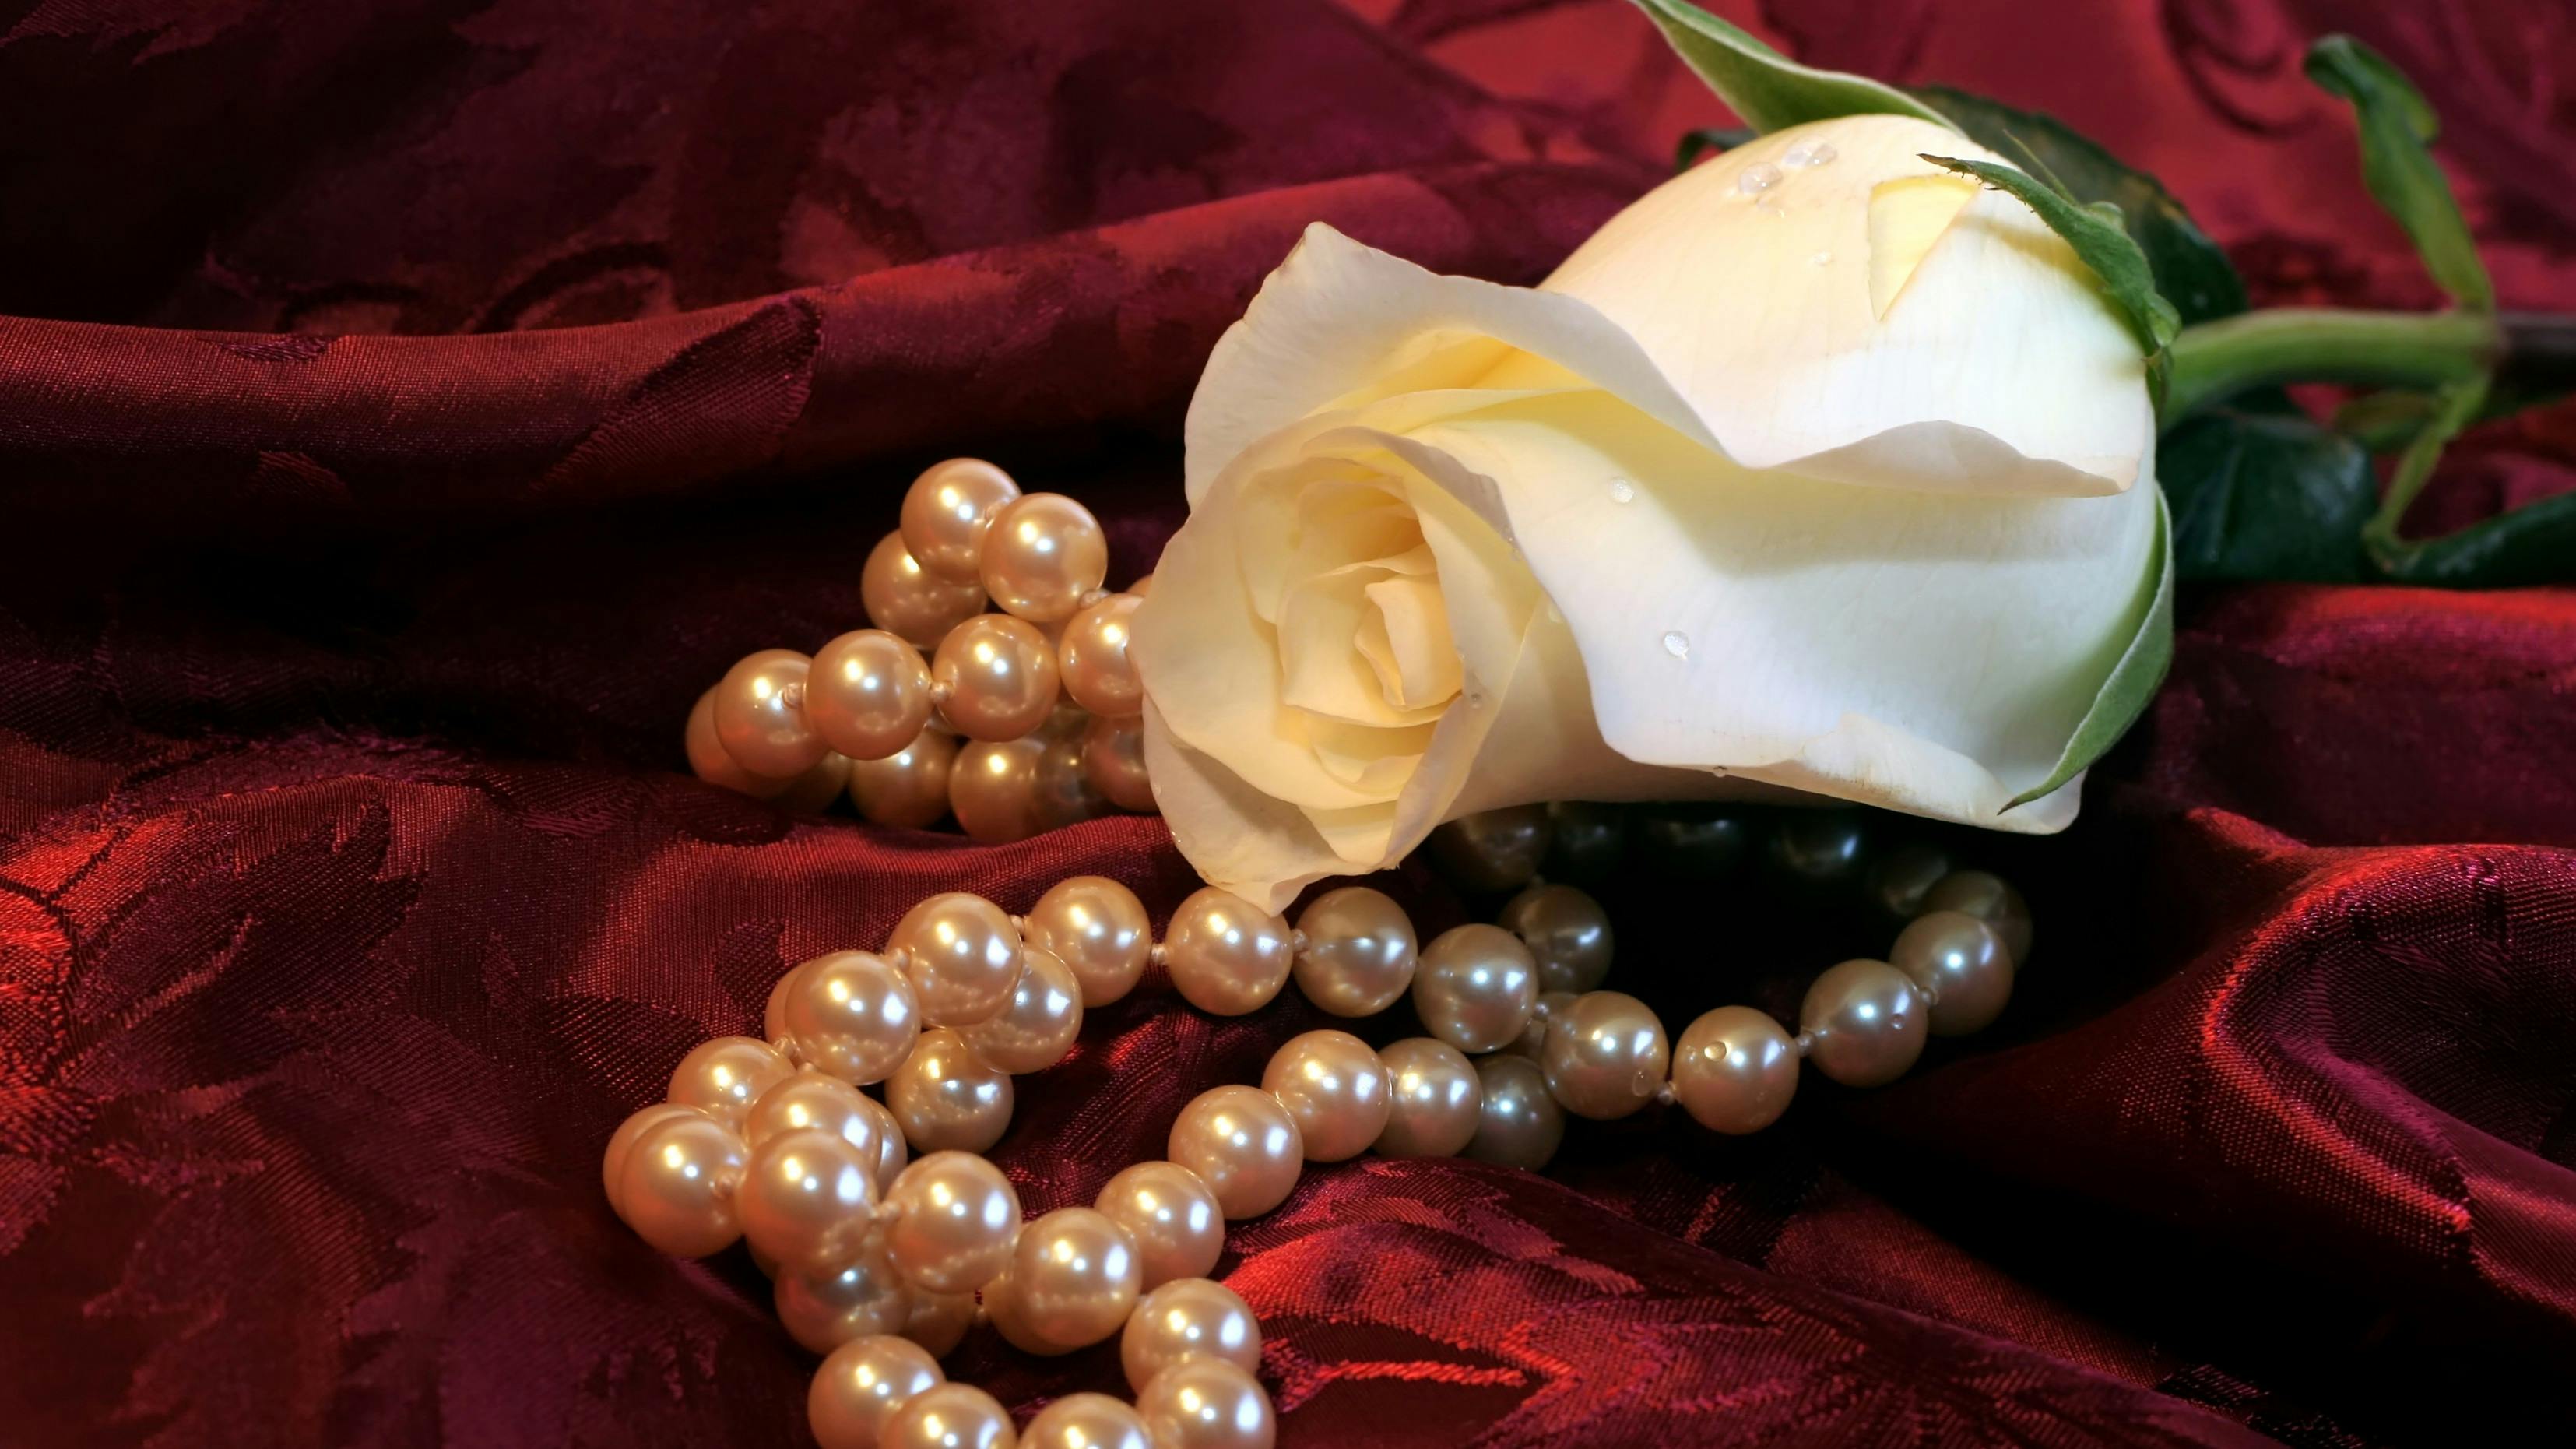 Beautiful white rose and strand of pearls on red satin